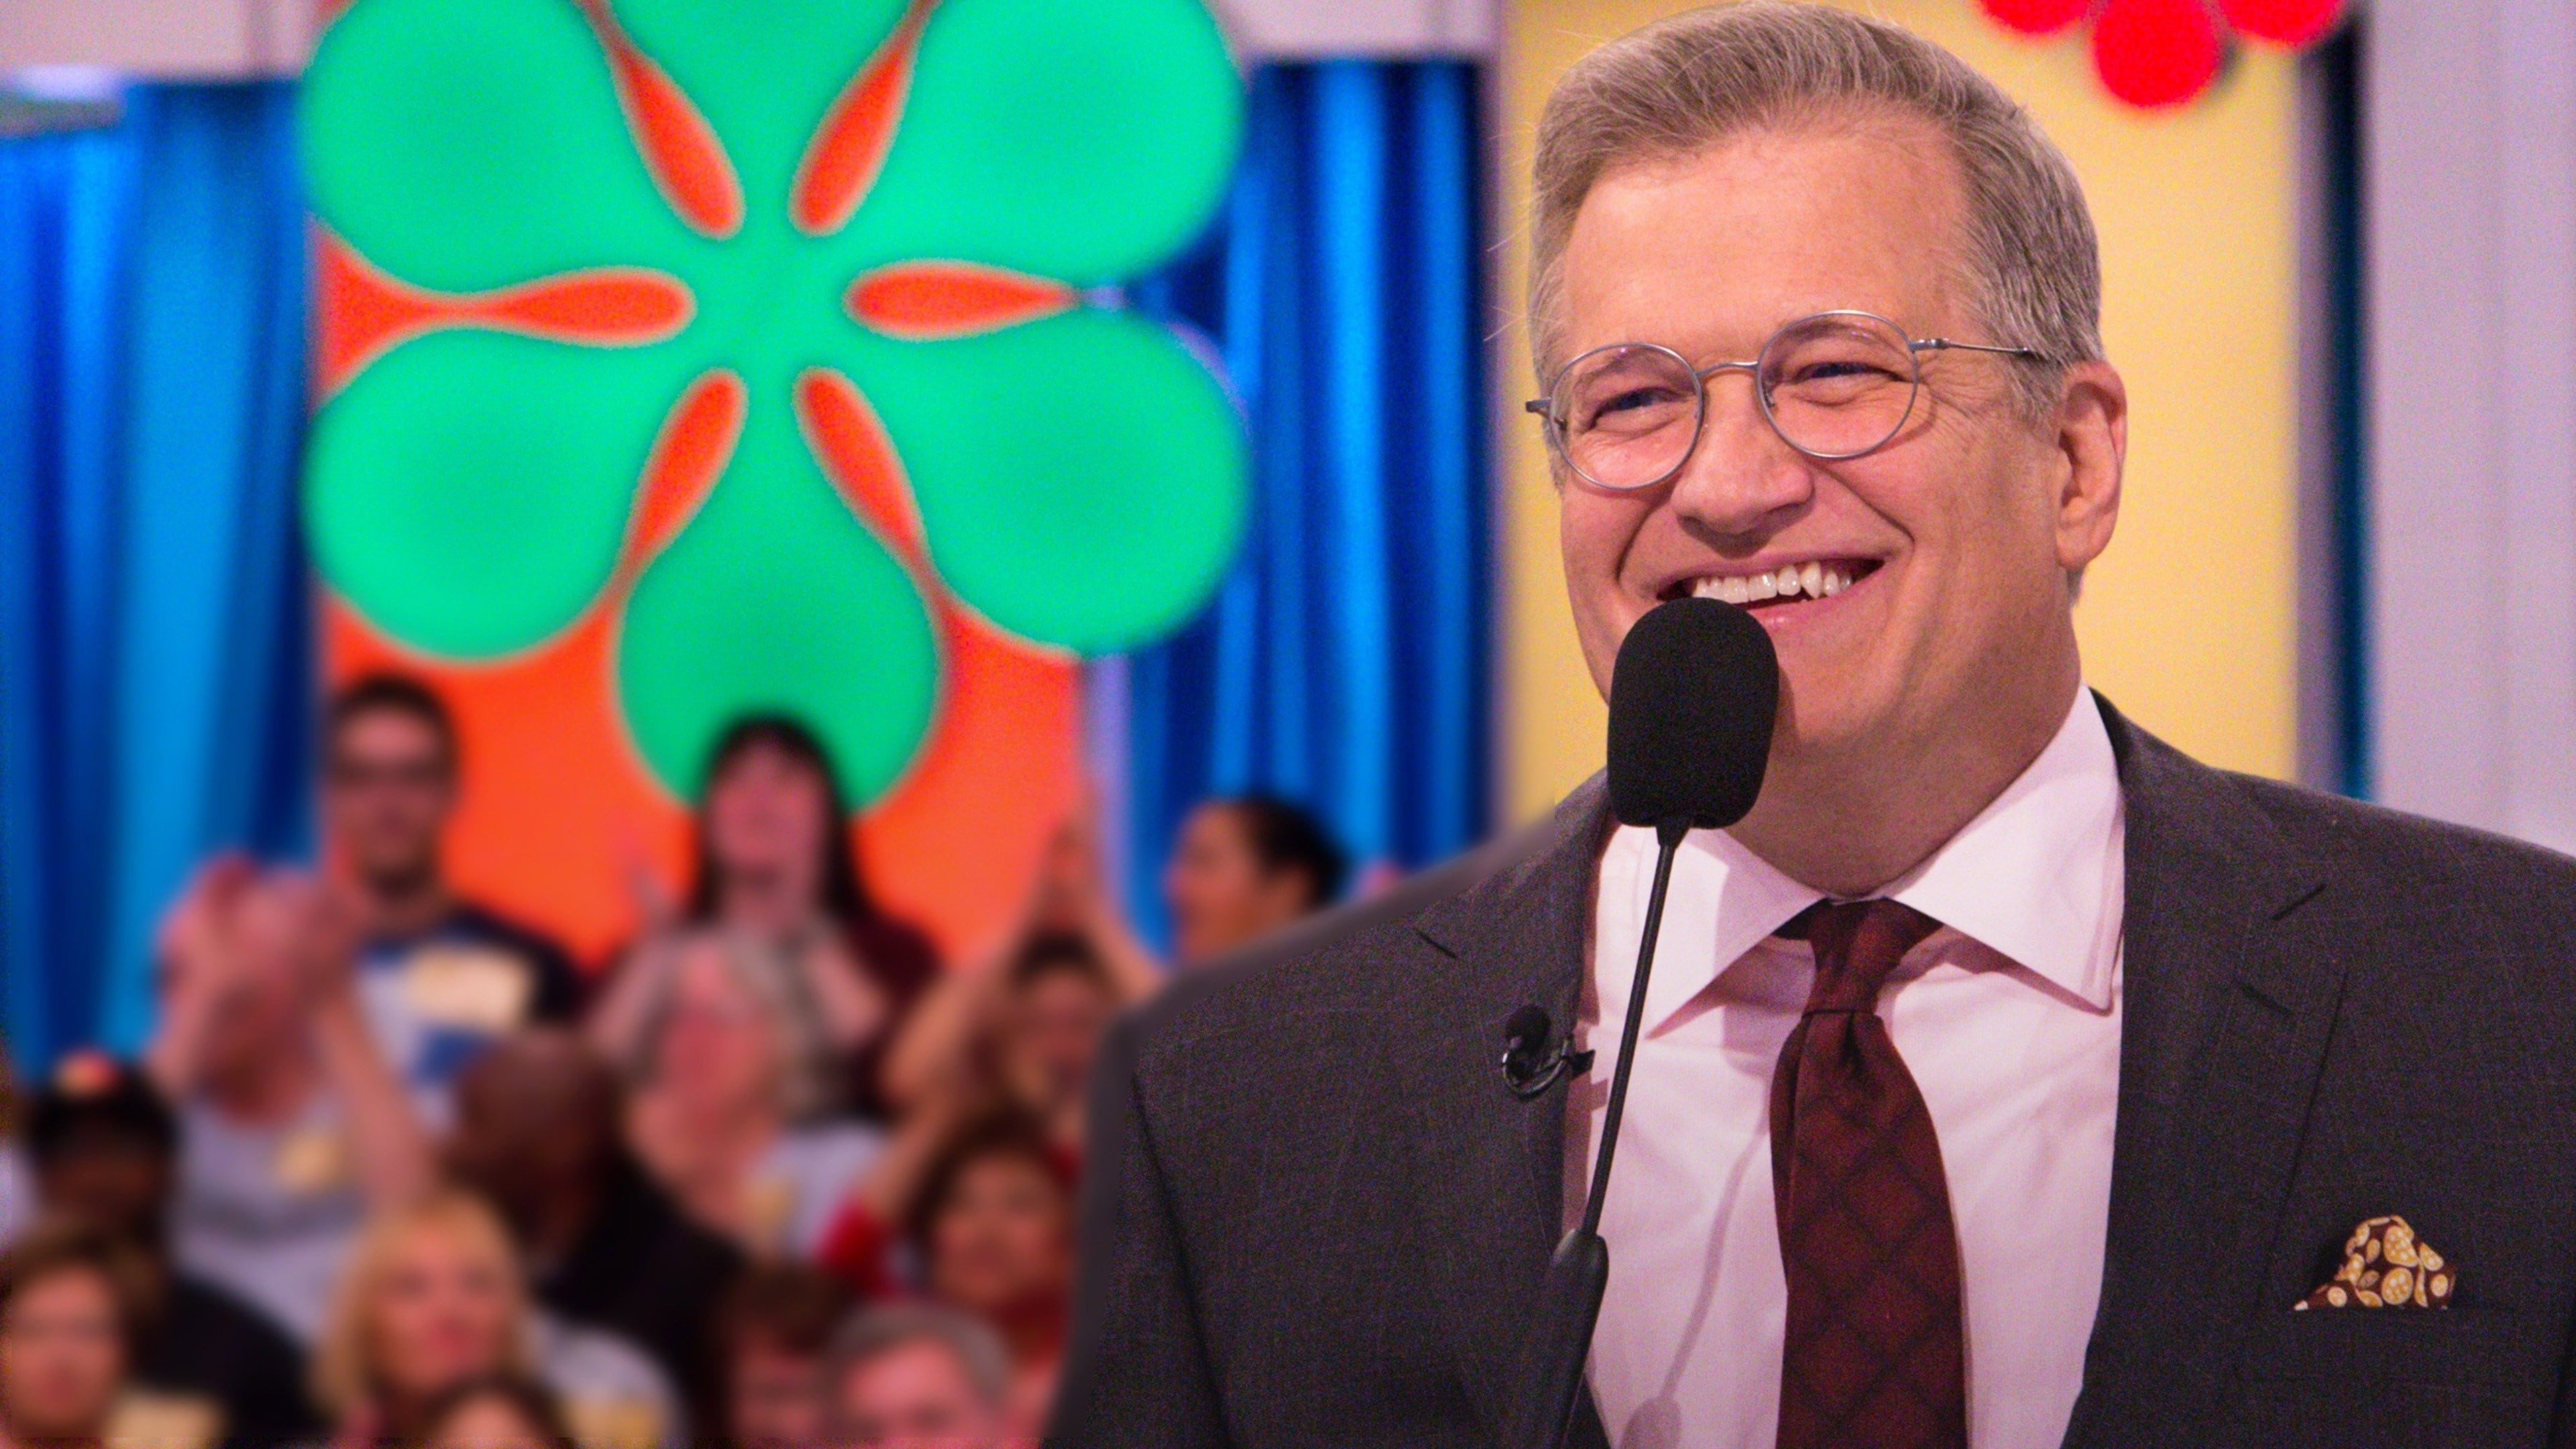 The Price Is Right - Season 2 Episode 209 : The Price Is Right Season 2 Episode 209